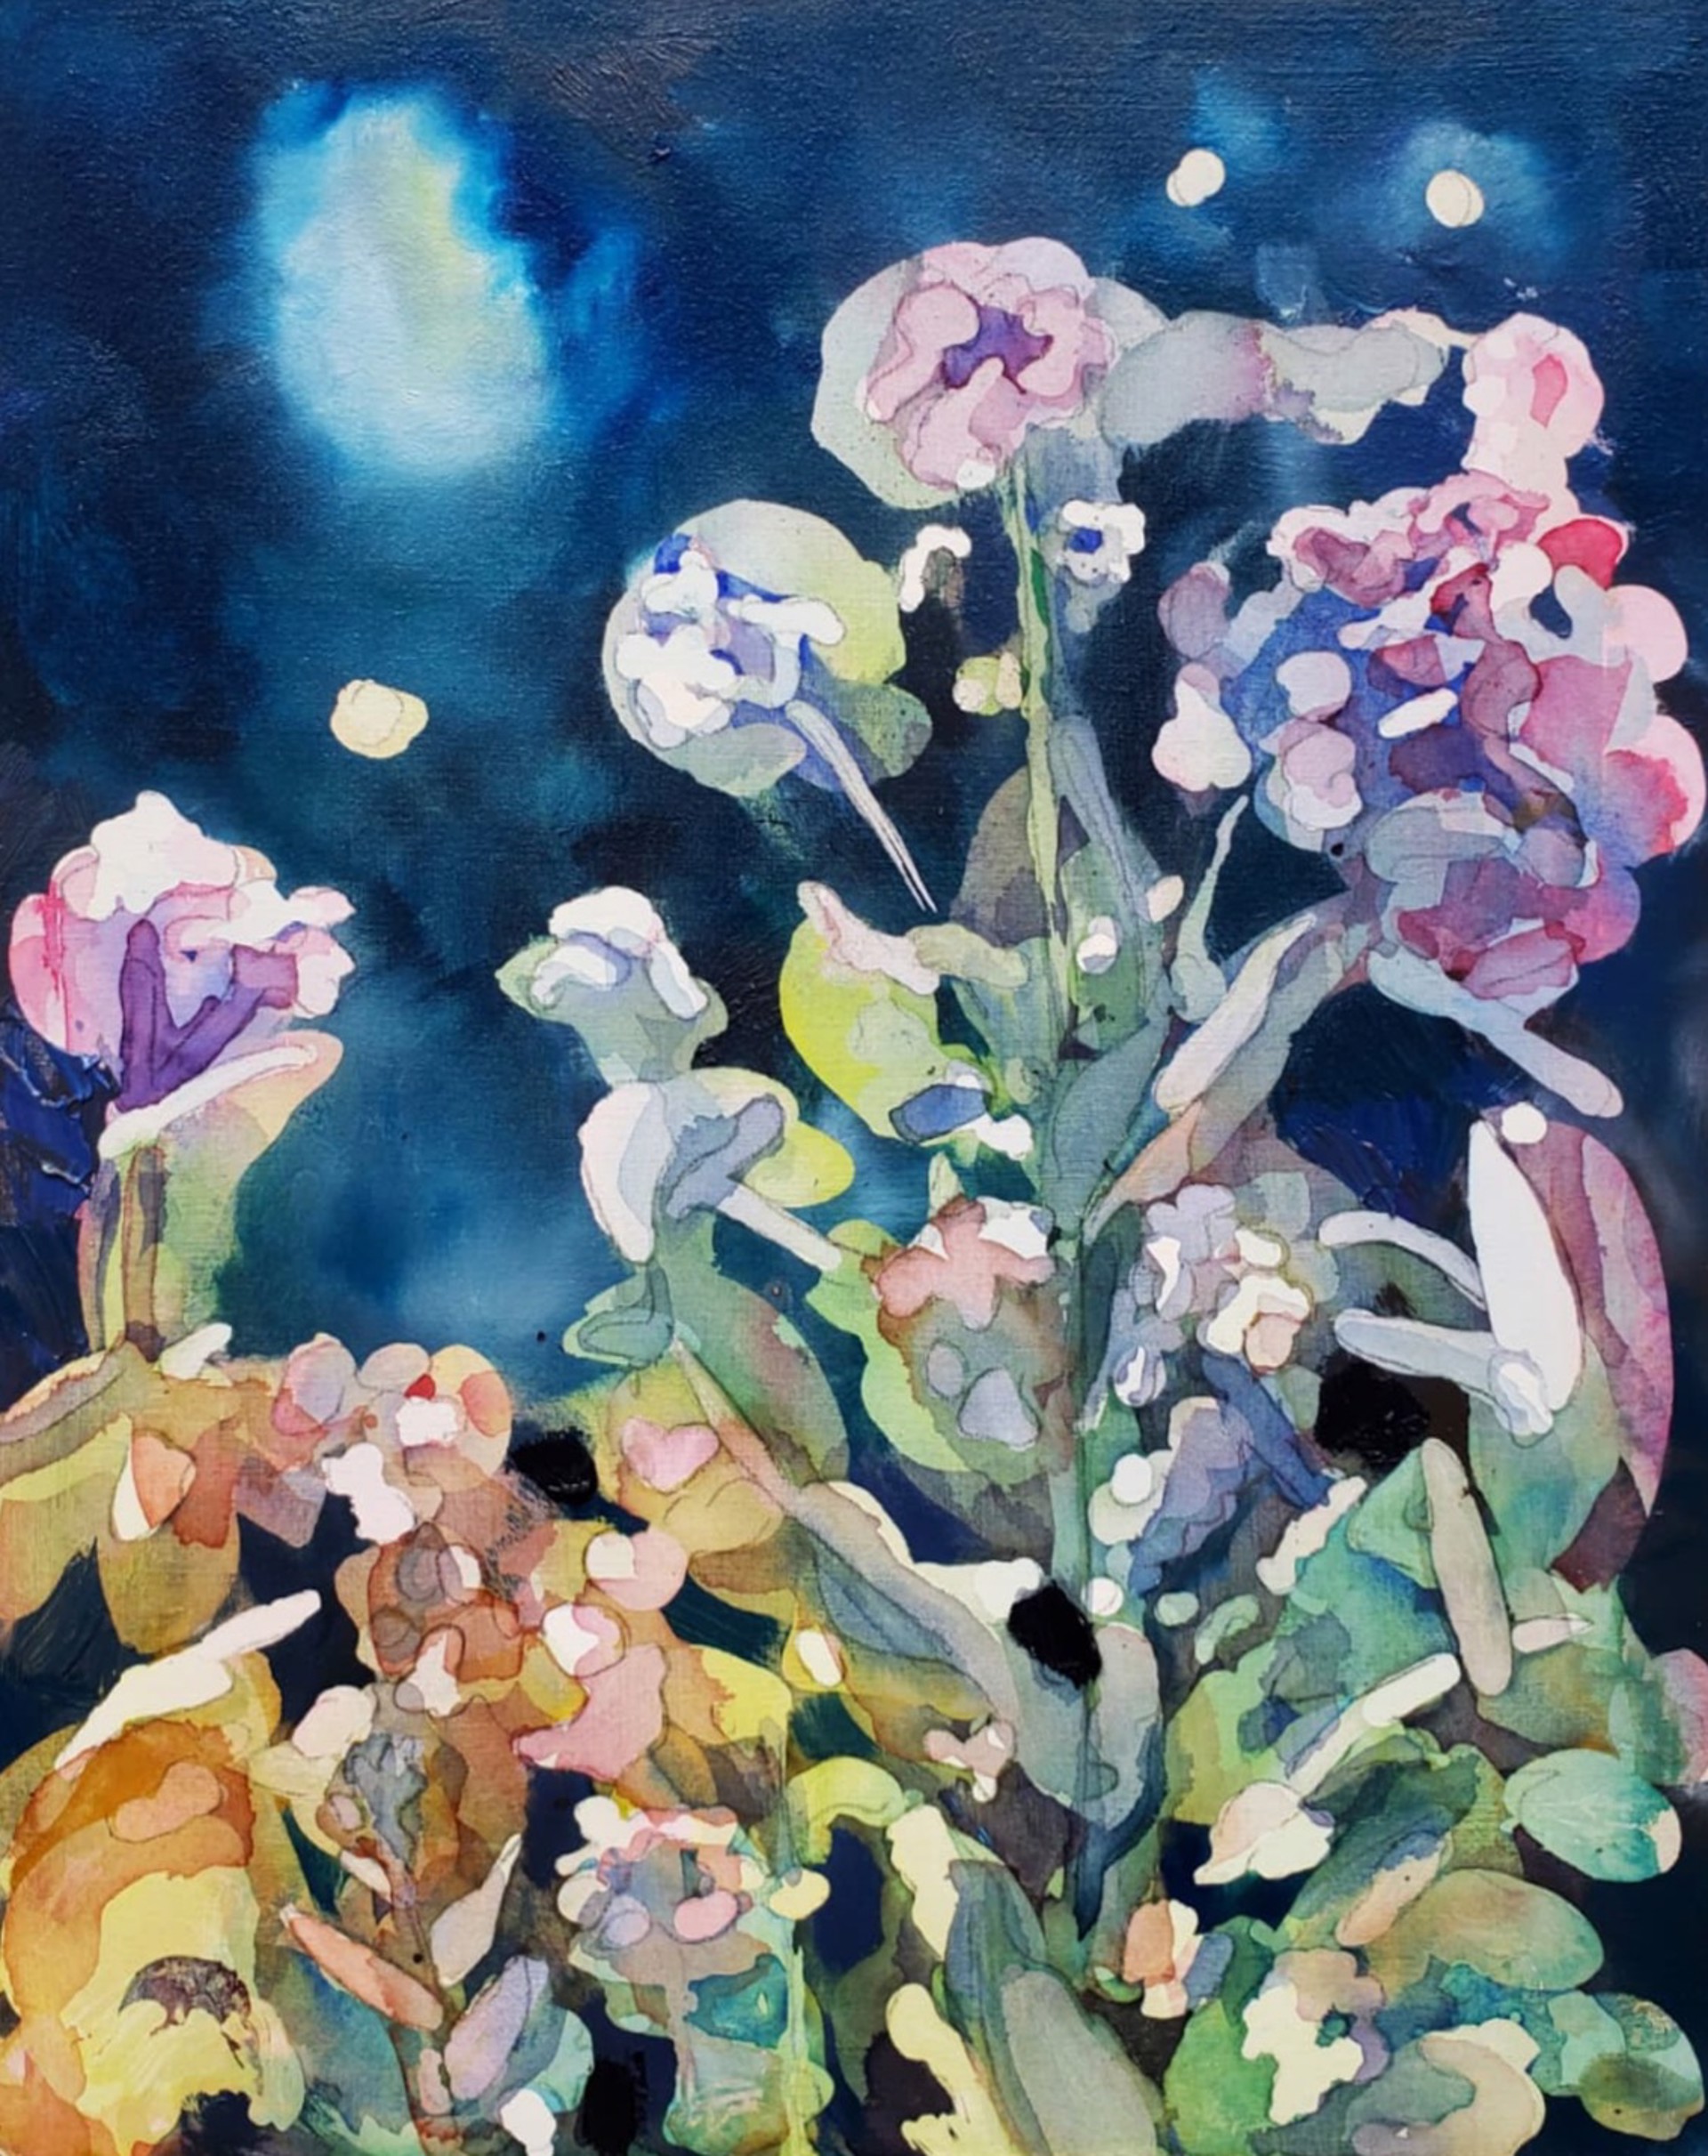 Night Flowers by Laura Madera